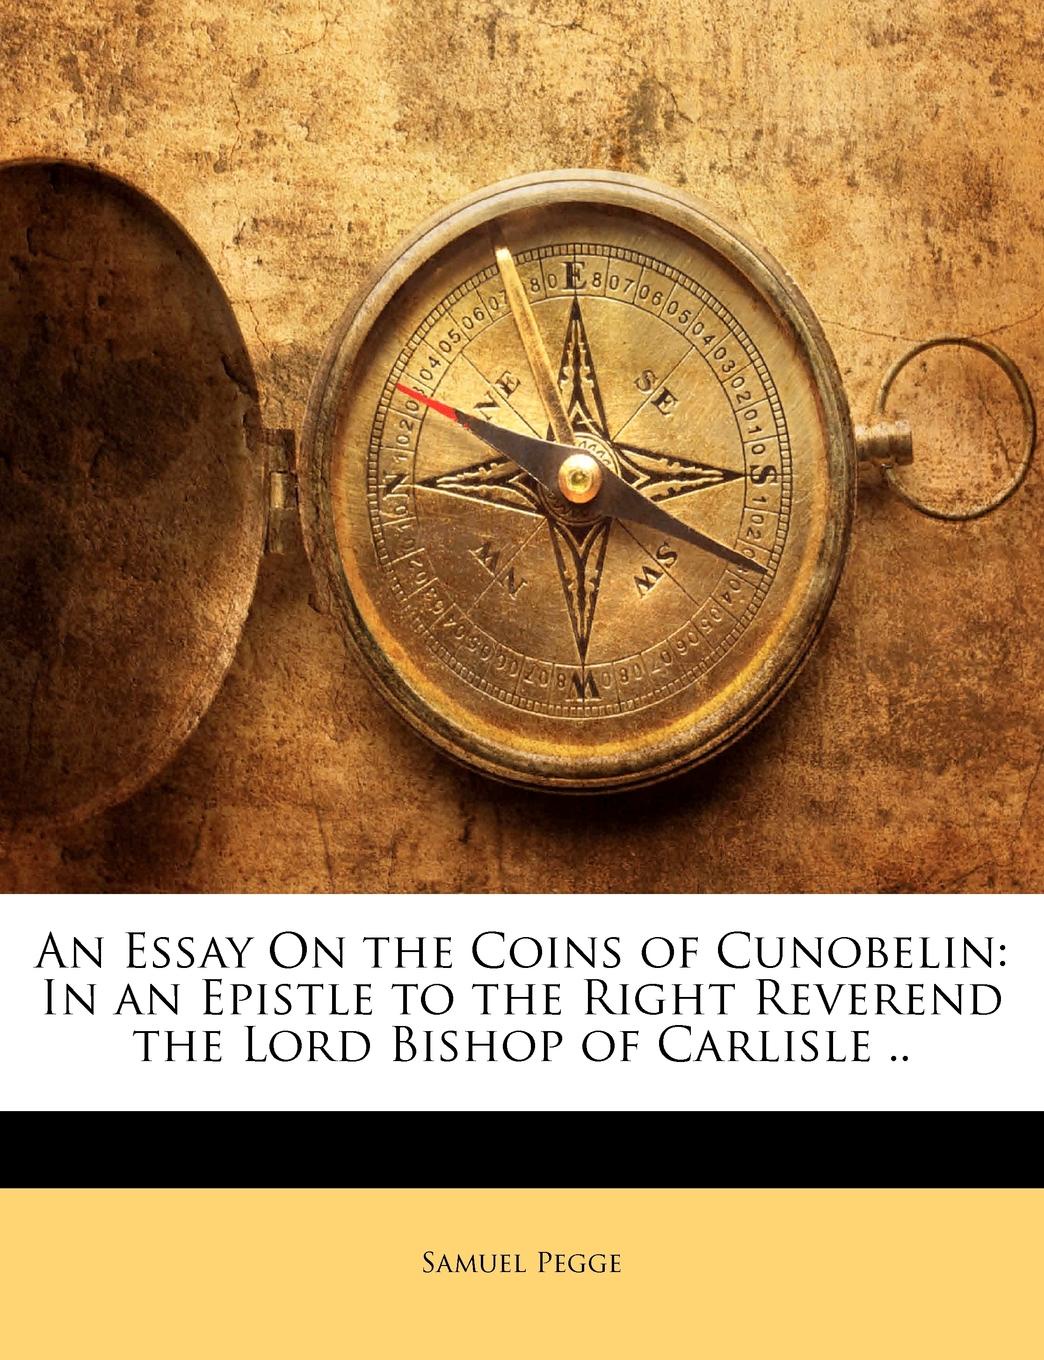 An Essay On the Coins of Cunobelin. In an Epistle to the Right Reverend the Lord Bishop of Carlisle ..